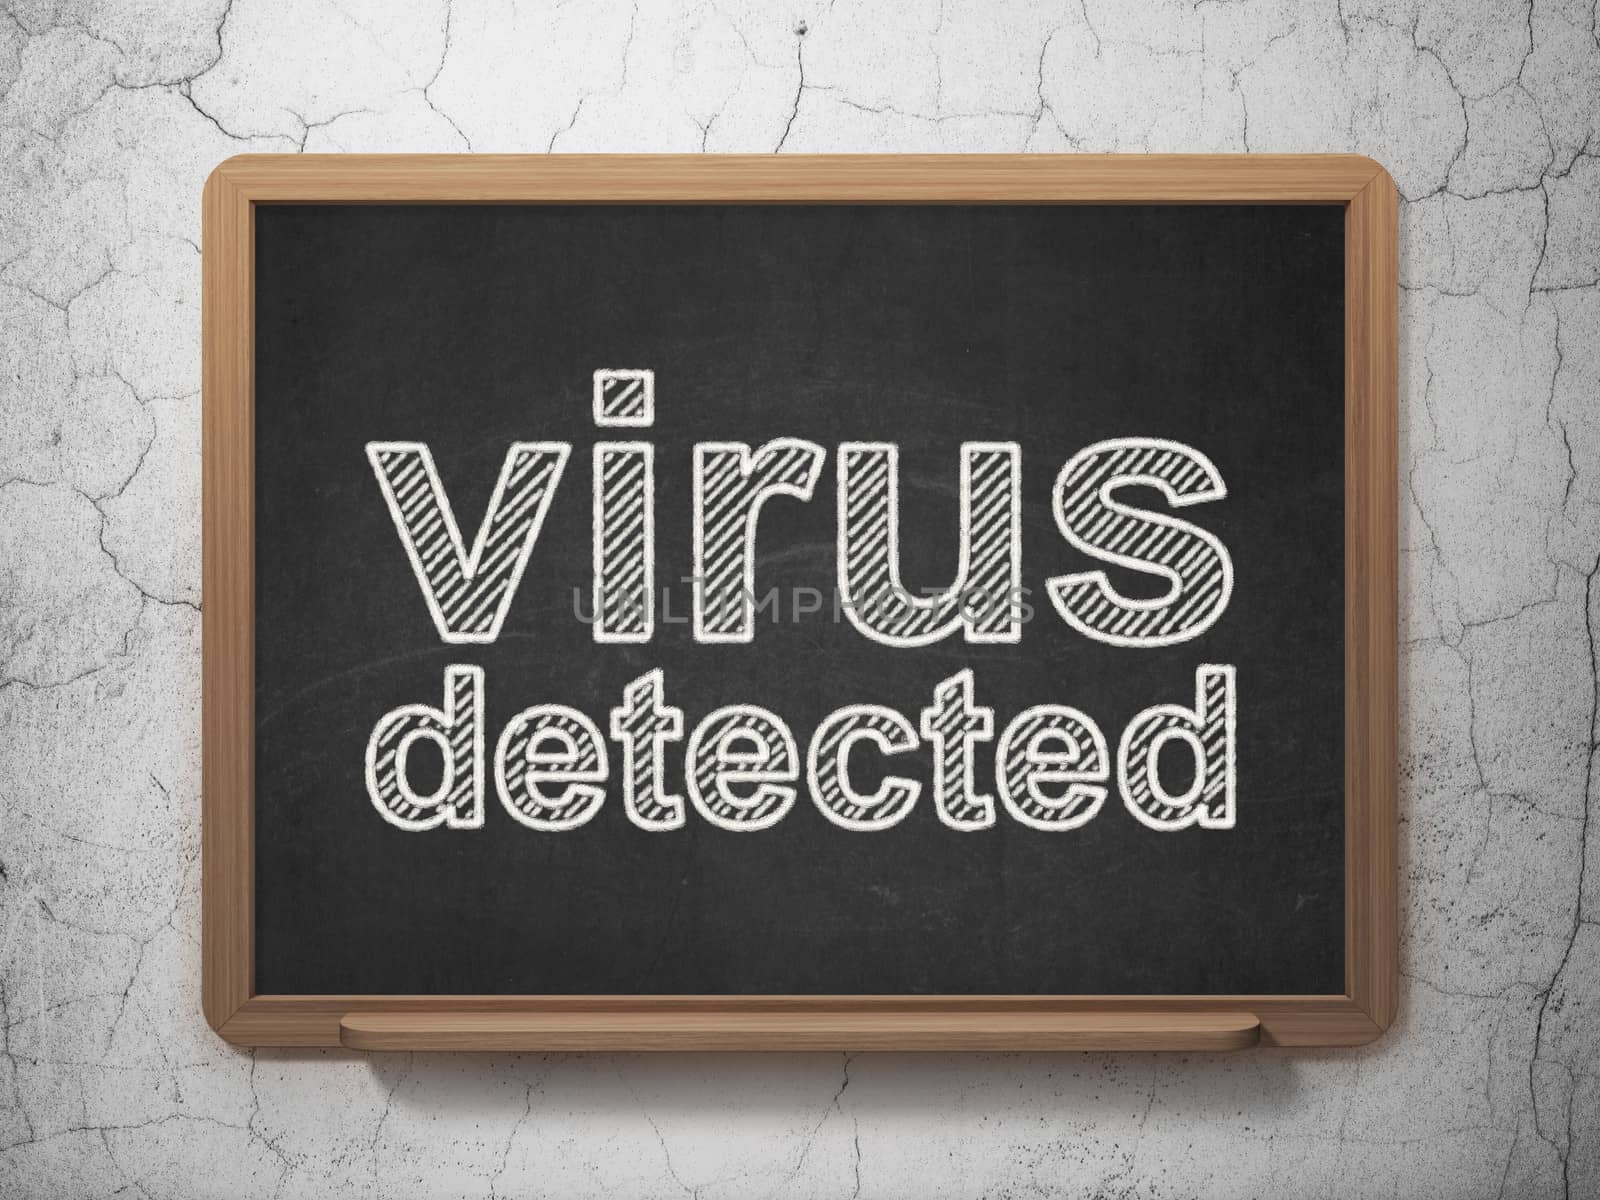 Protection concept: Virus Detected on chalkboard background by maxkabakov